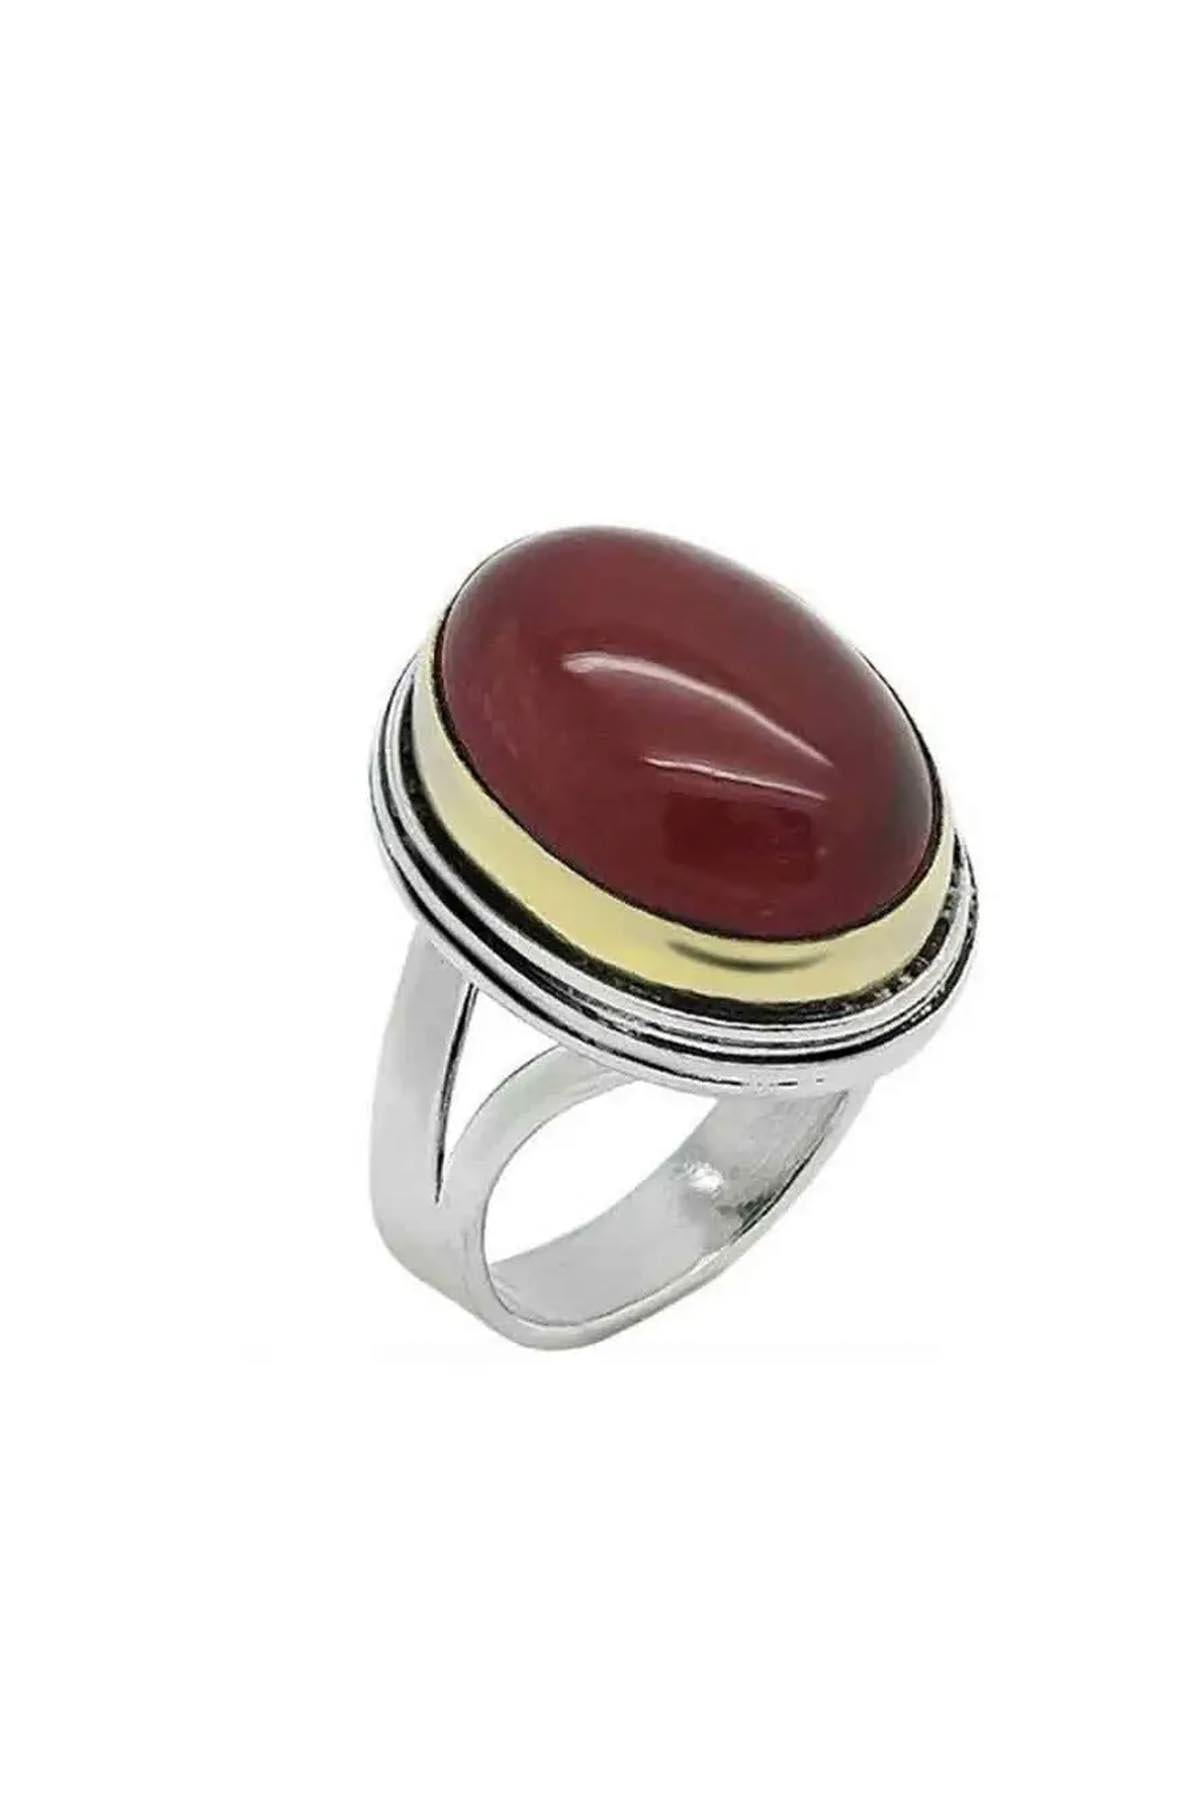 Sarma Series Silver Agate Stone Authentic Silver Ring Adjustable Size